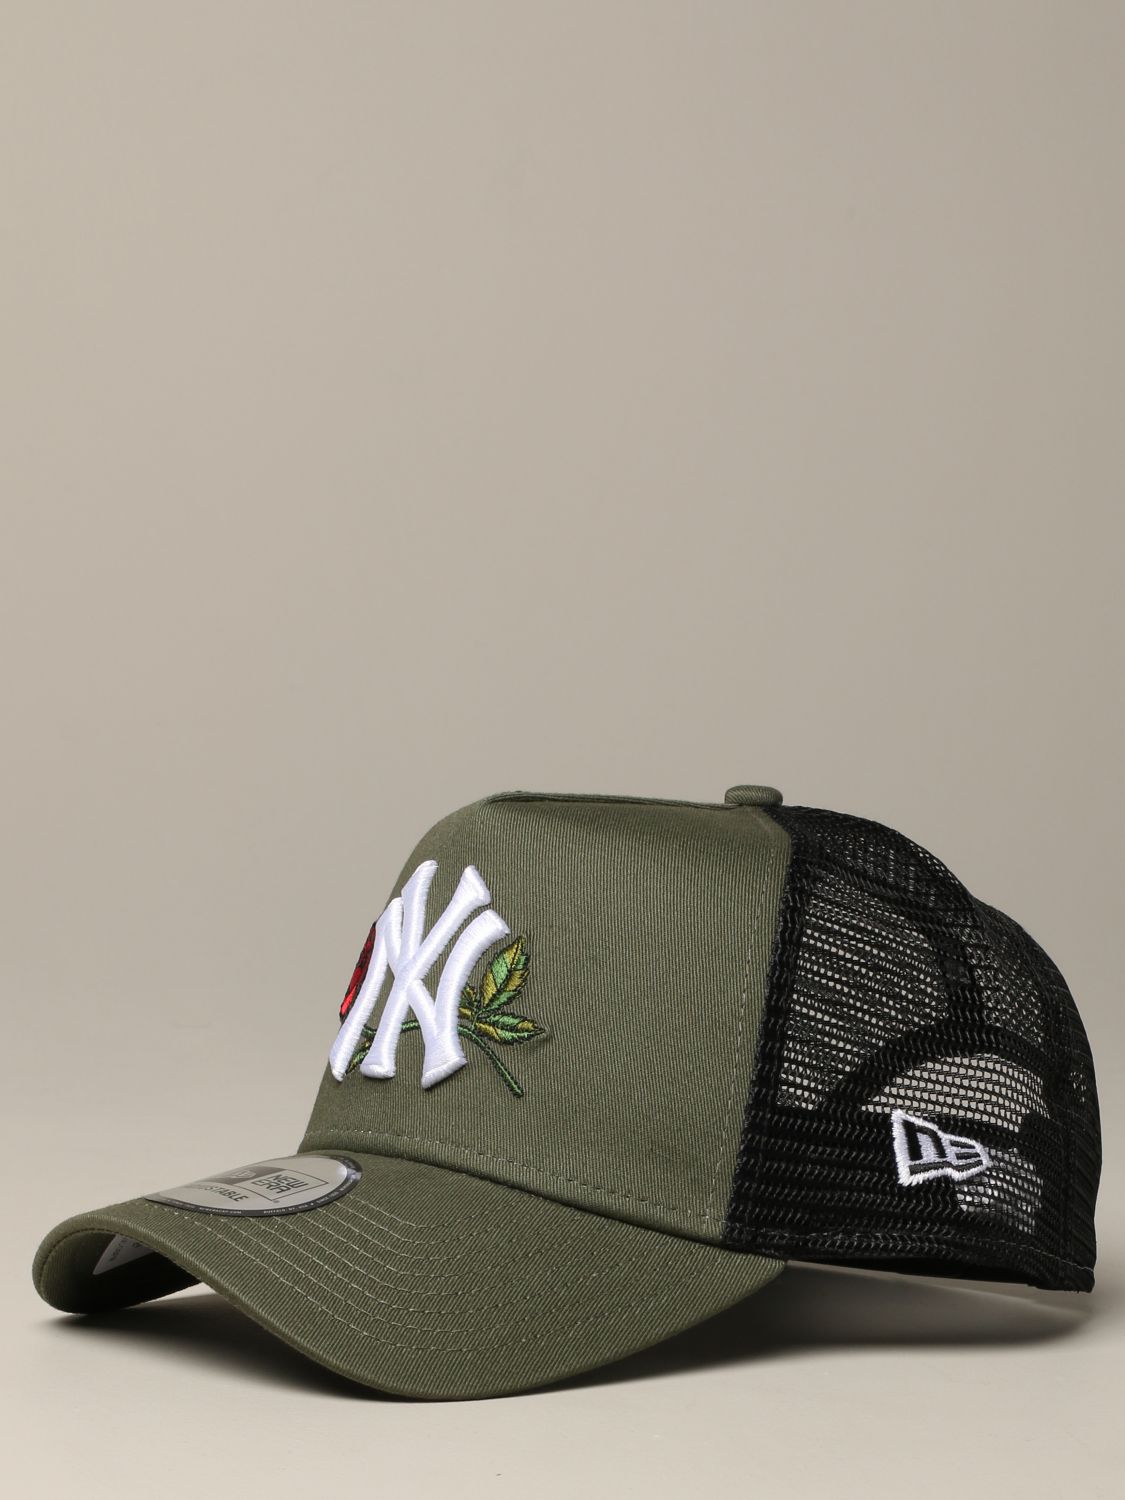 New Era Outlet: Trucker hat with NY Yankees logo - Military